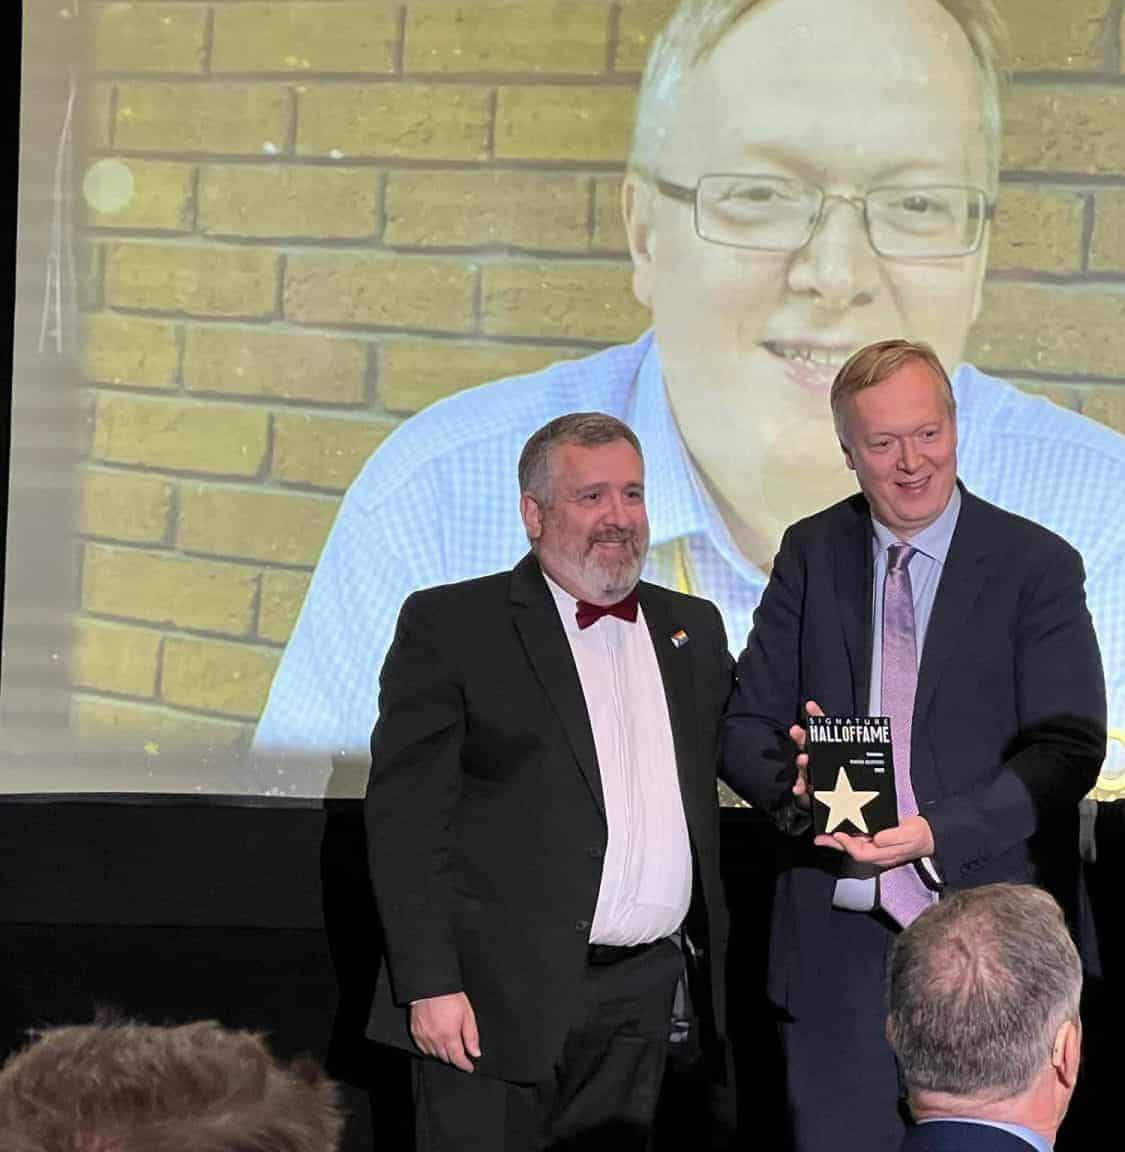 Two men, one holding an award, standing in front of a screen displaying a smiling man's image at an indoor event.